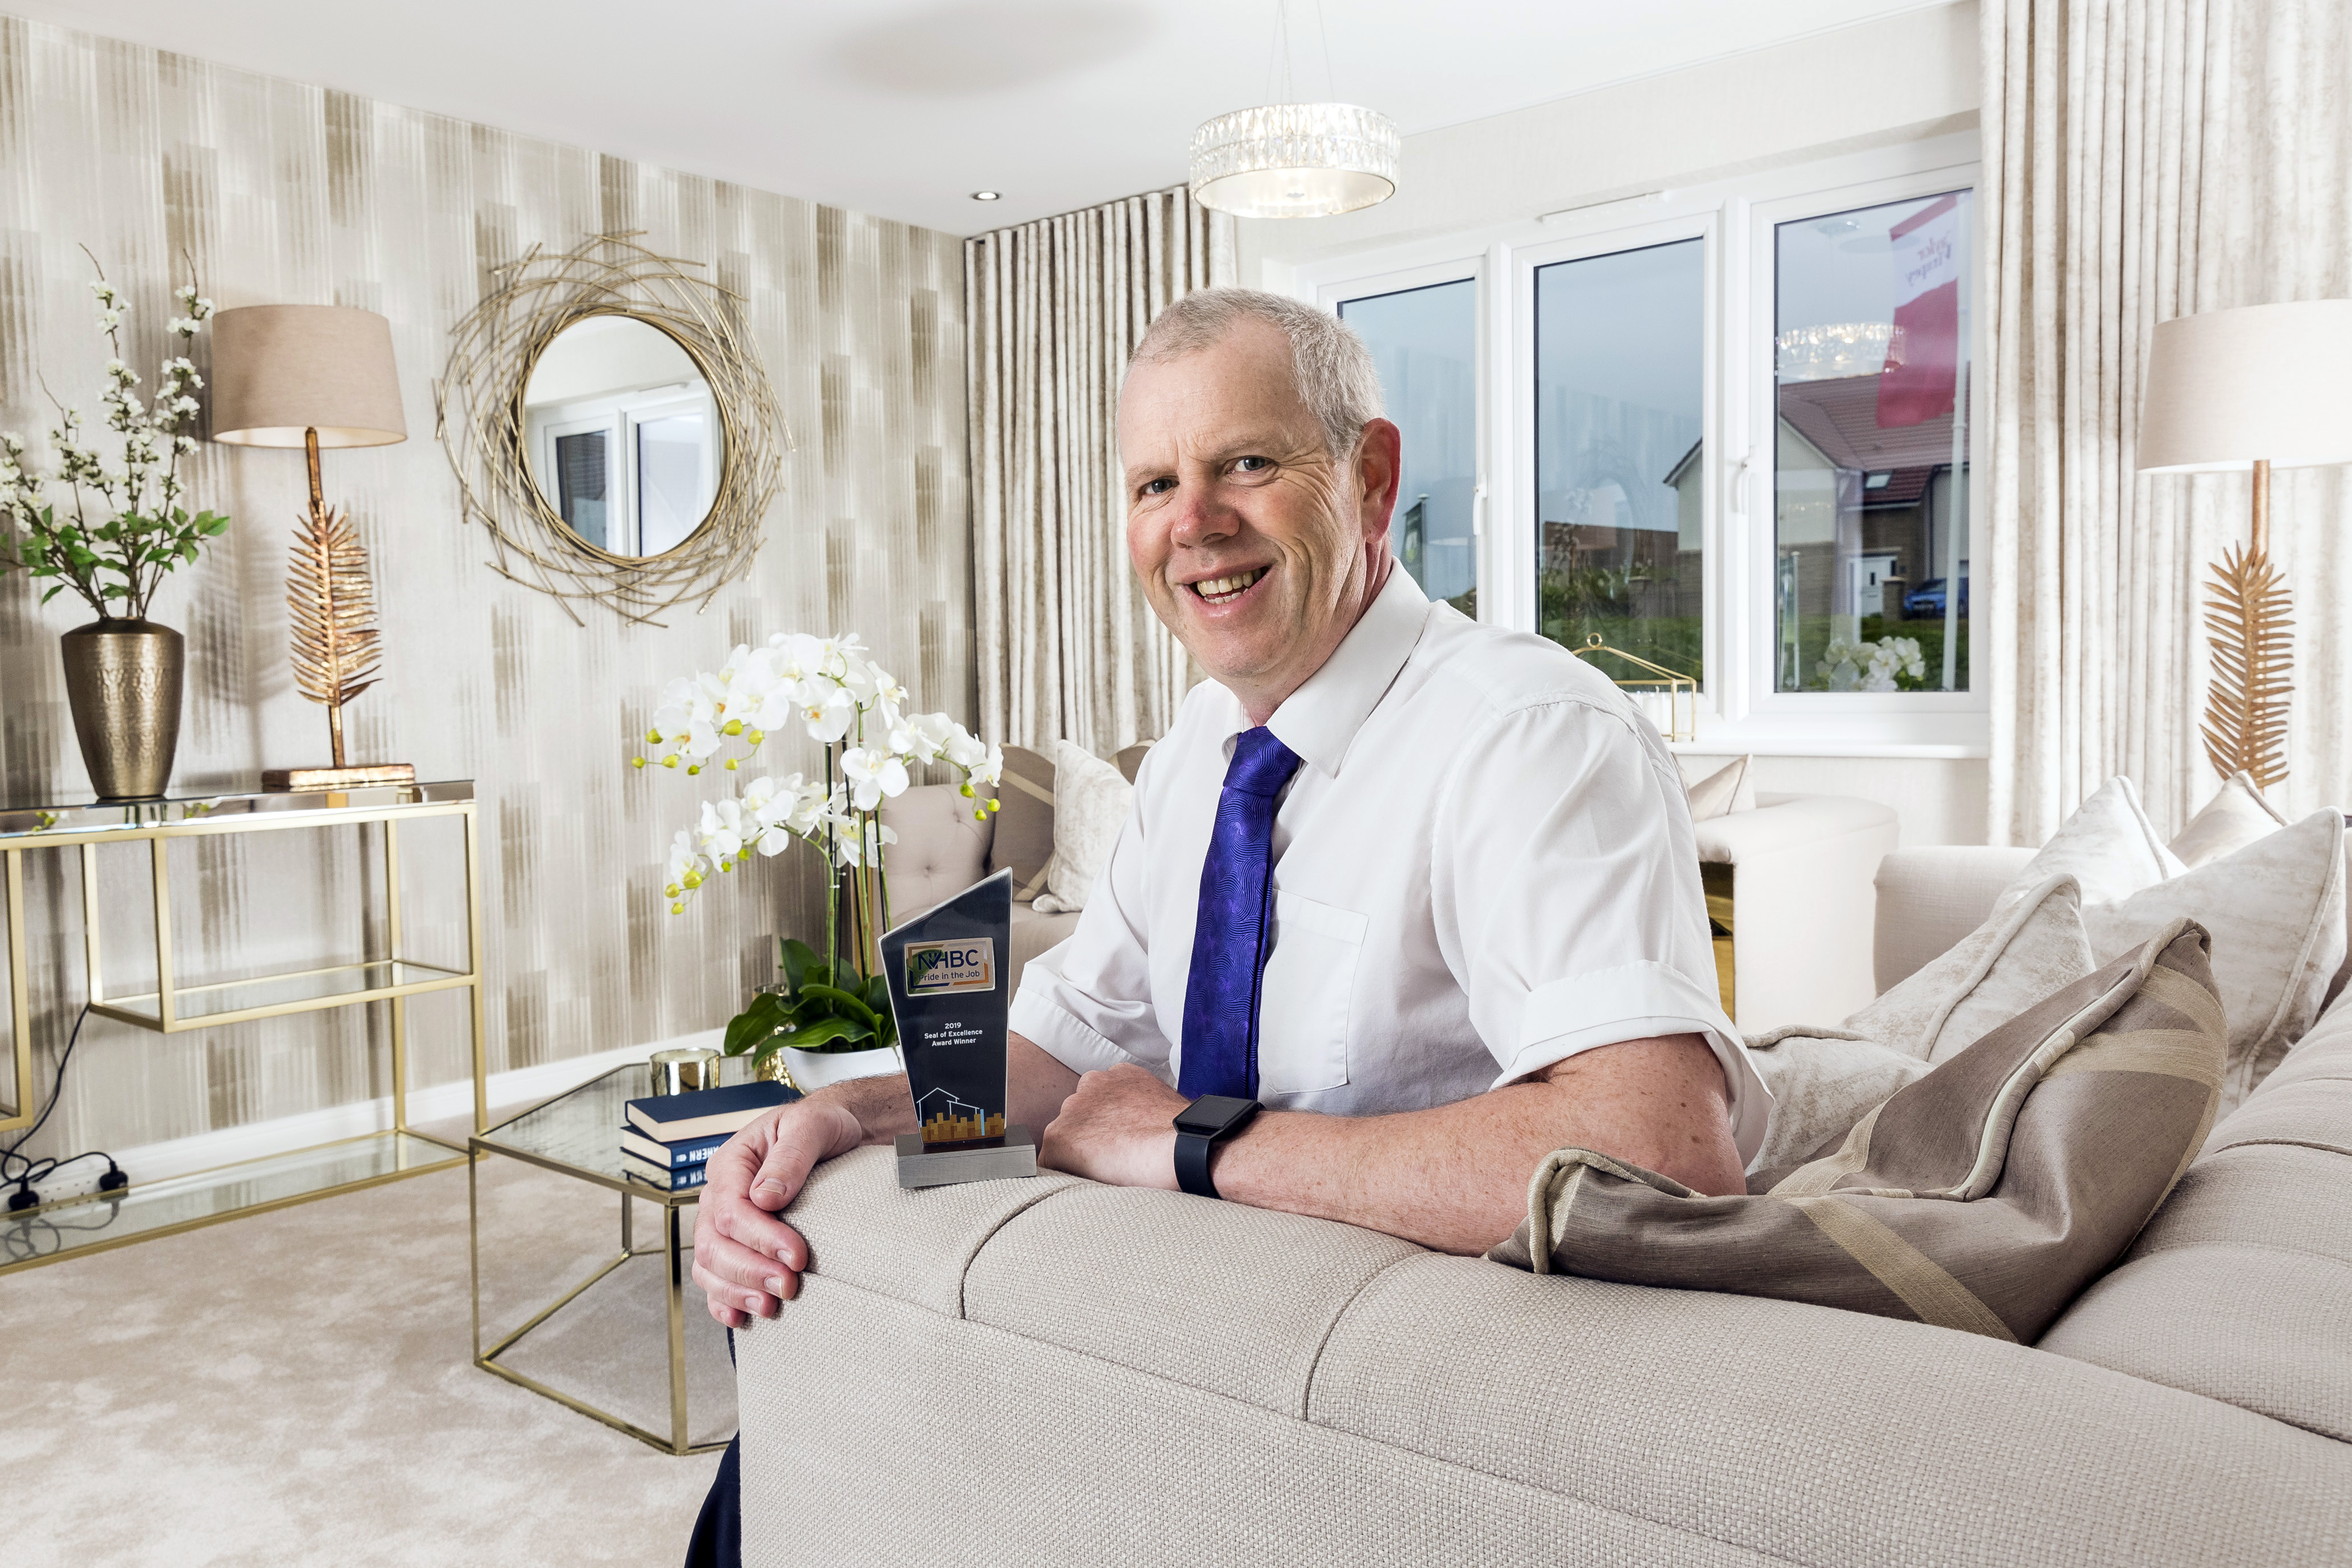 Double NHBC success for Taylor Wimpey senior site managers